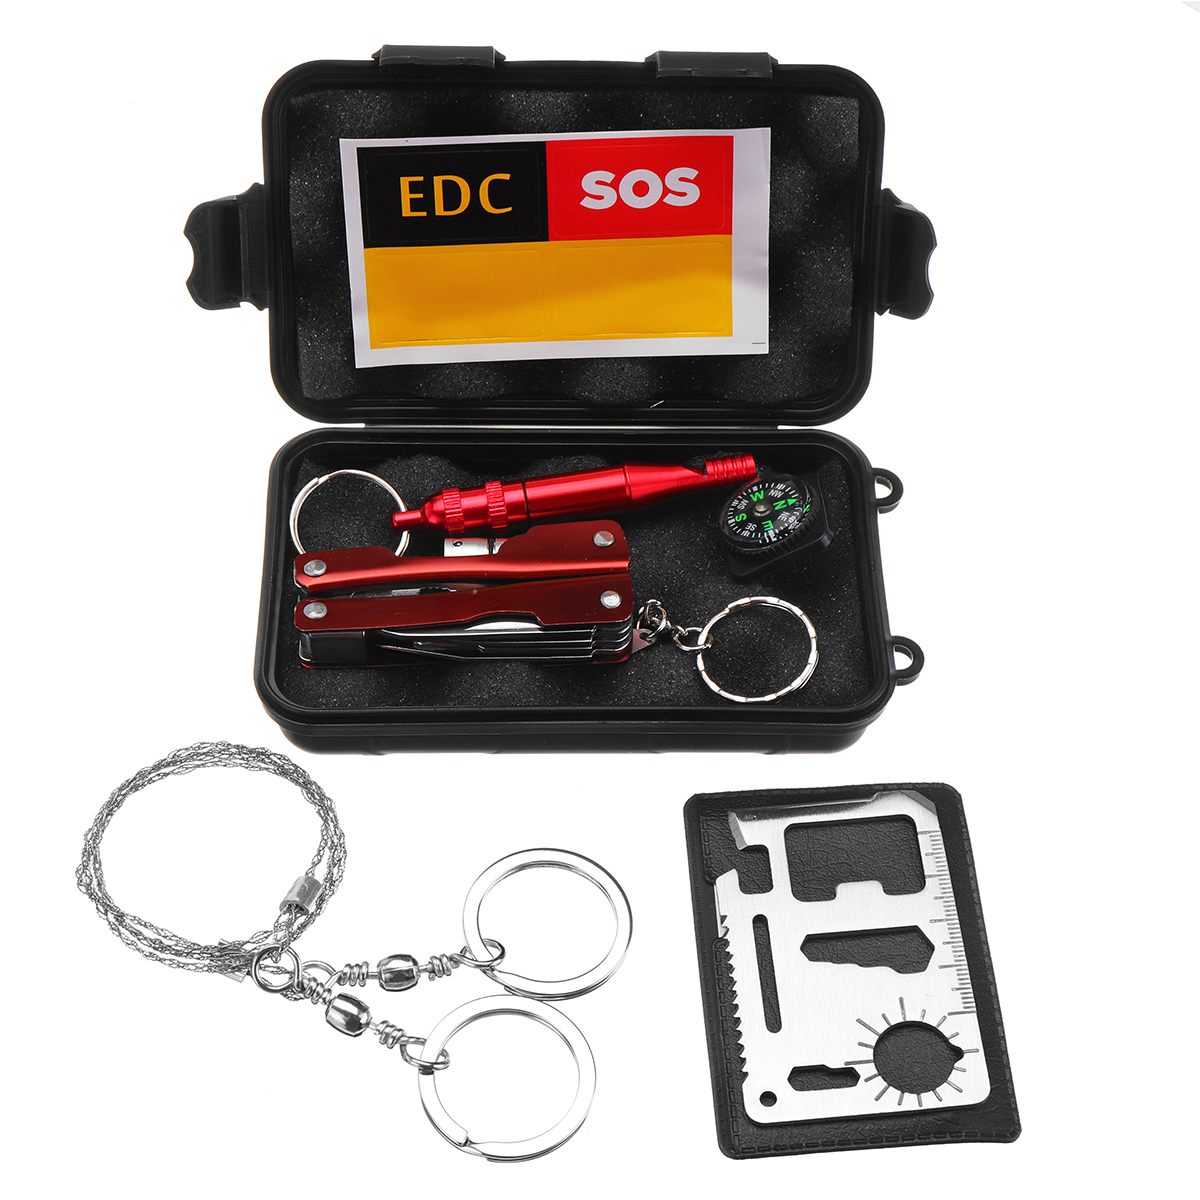 

SOS Emergency Survival Equipment Kit EDC Sports Tactical Hiking Camping Tools